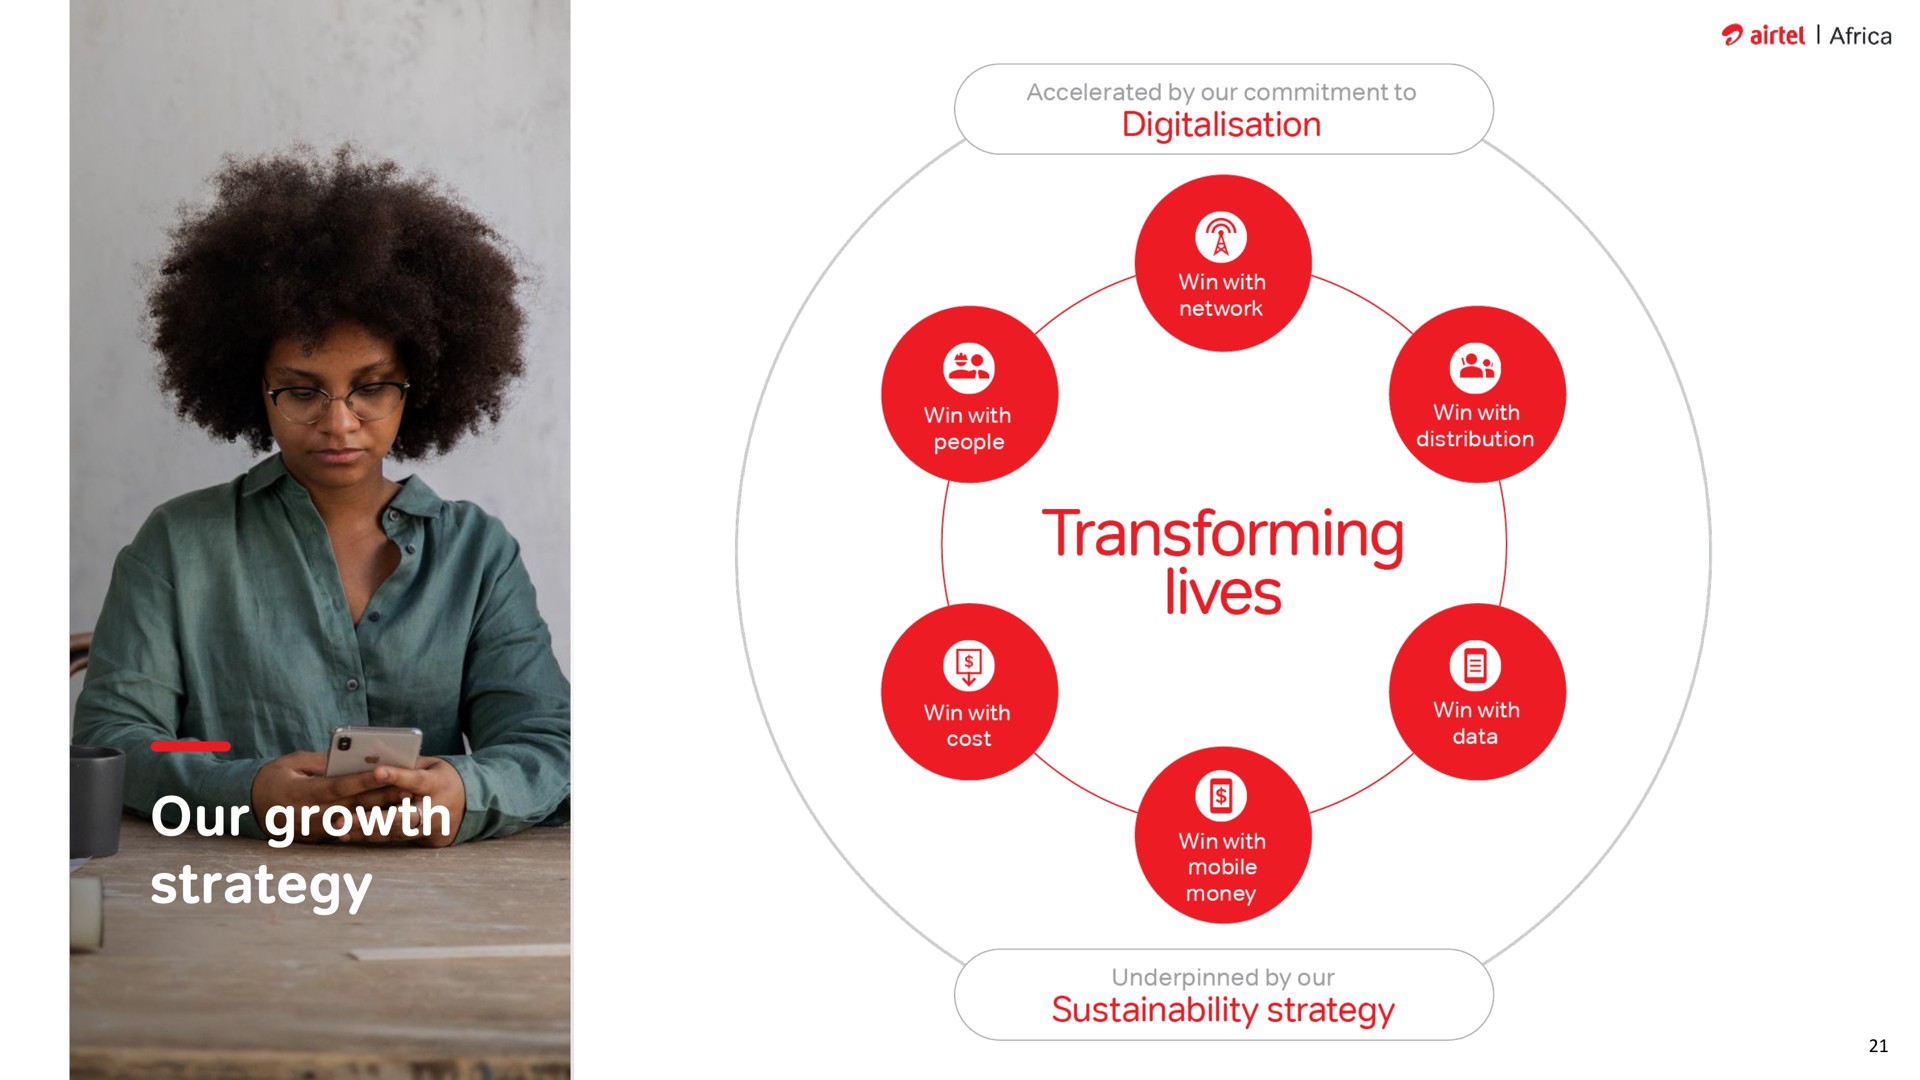 our growth strategy a a transforming lives | Airtel Africa